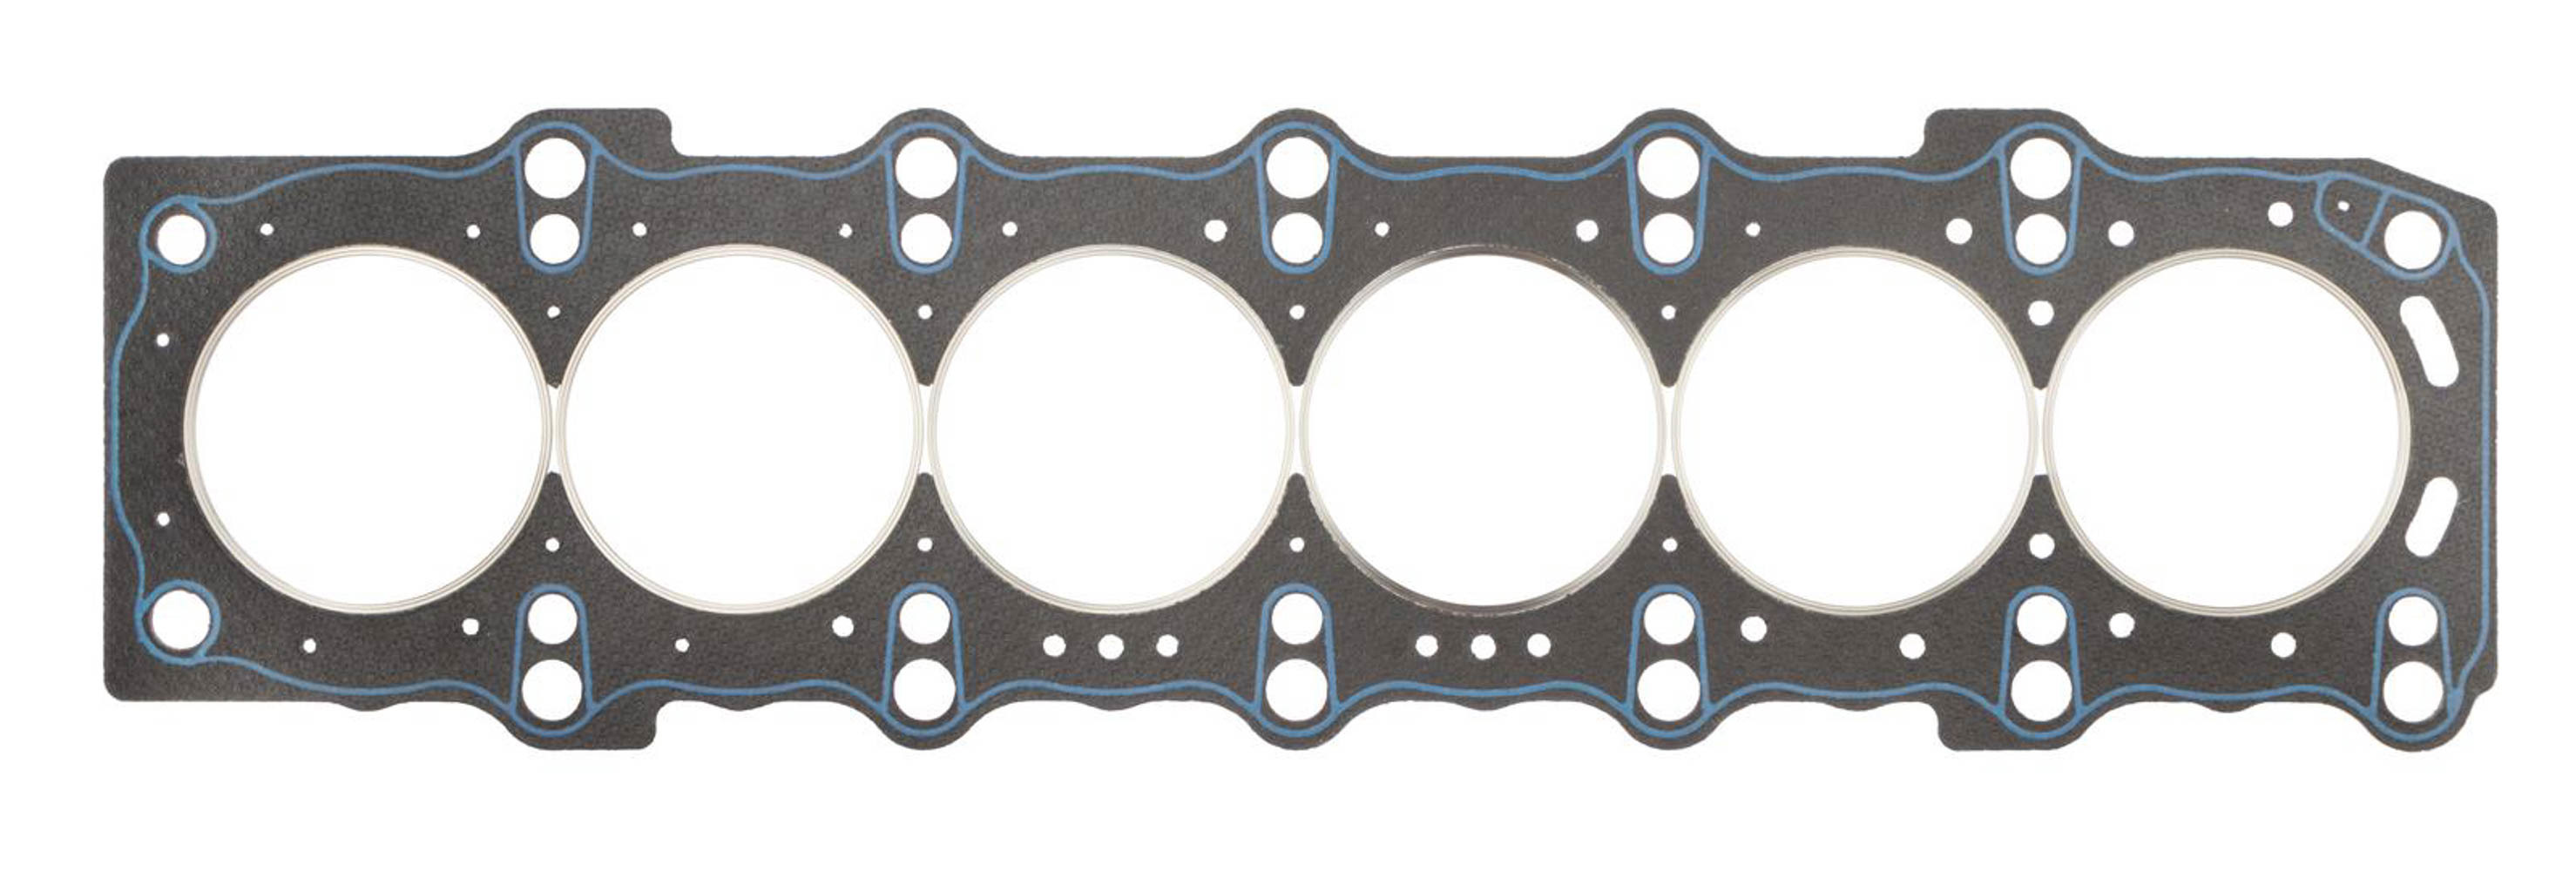 SCE Gaskets CR330044 - Cylinder Head Gasket, Vulcan Cut Ring, 87.00 mm Bore, 1.60 mm Compression Thickness, Steel Core Laminate, Toyota V6, Each